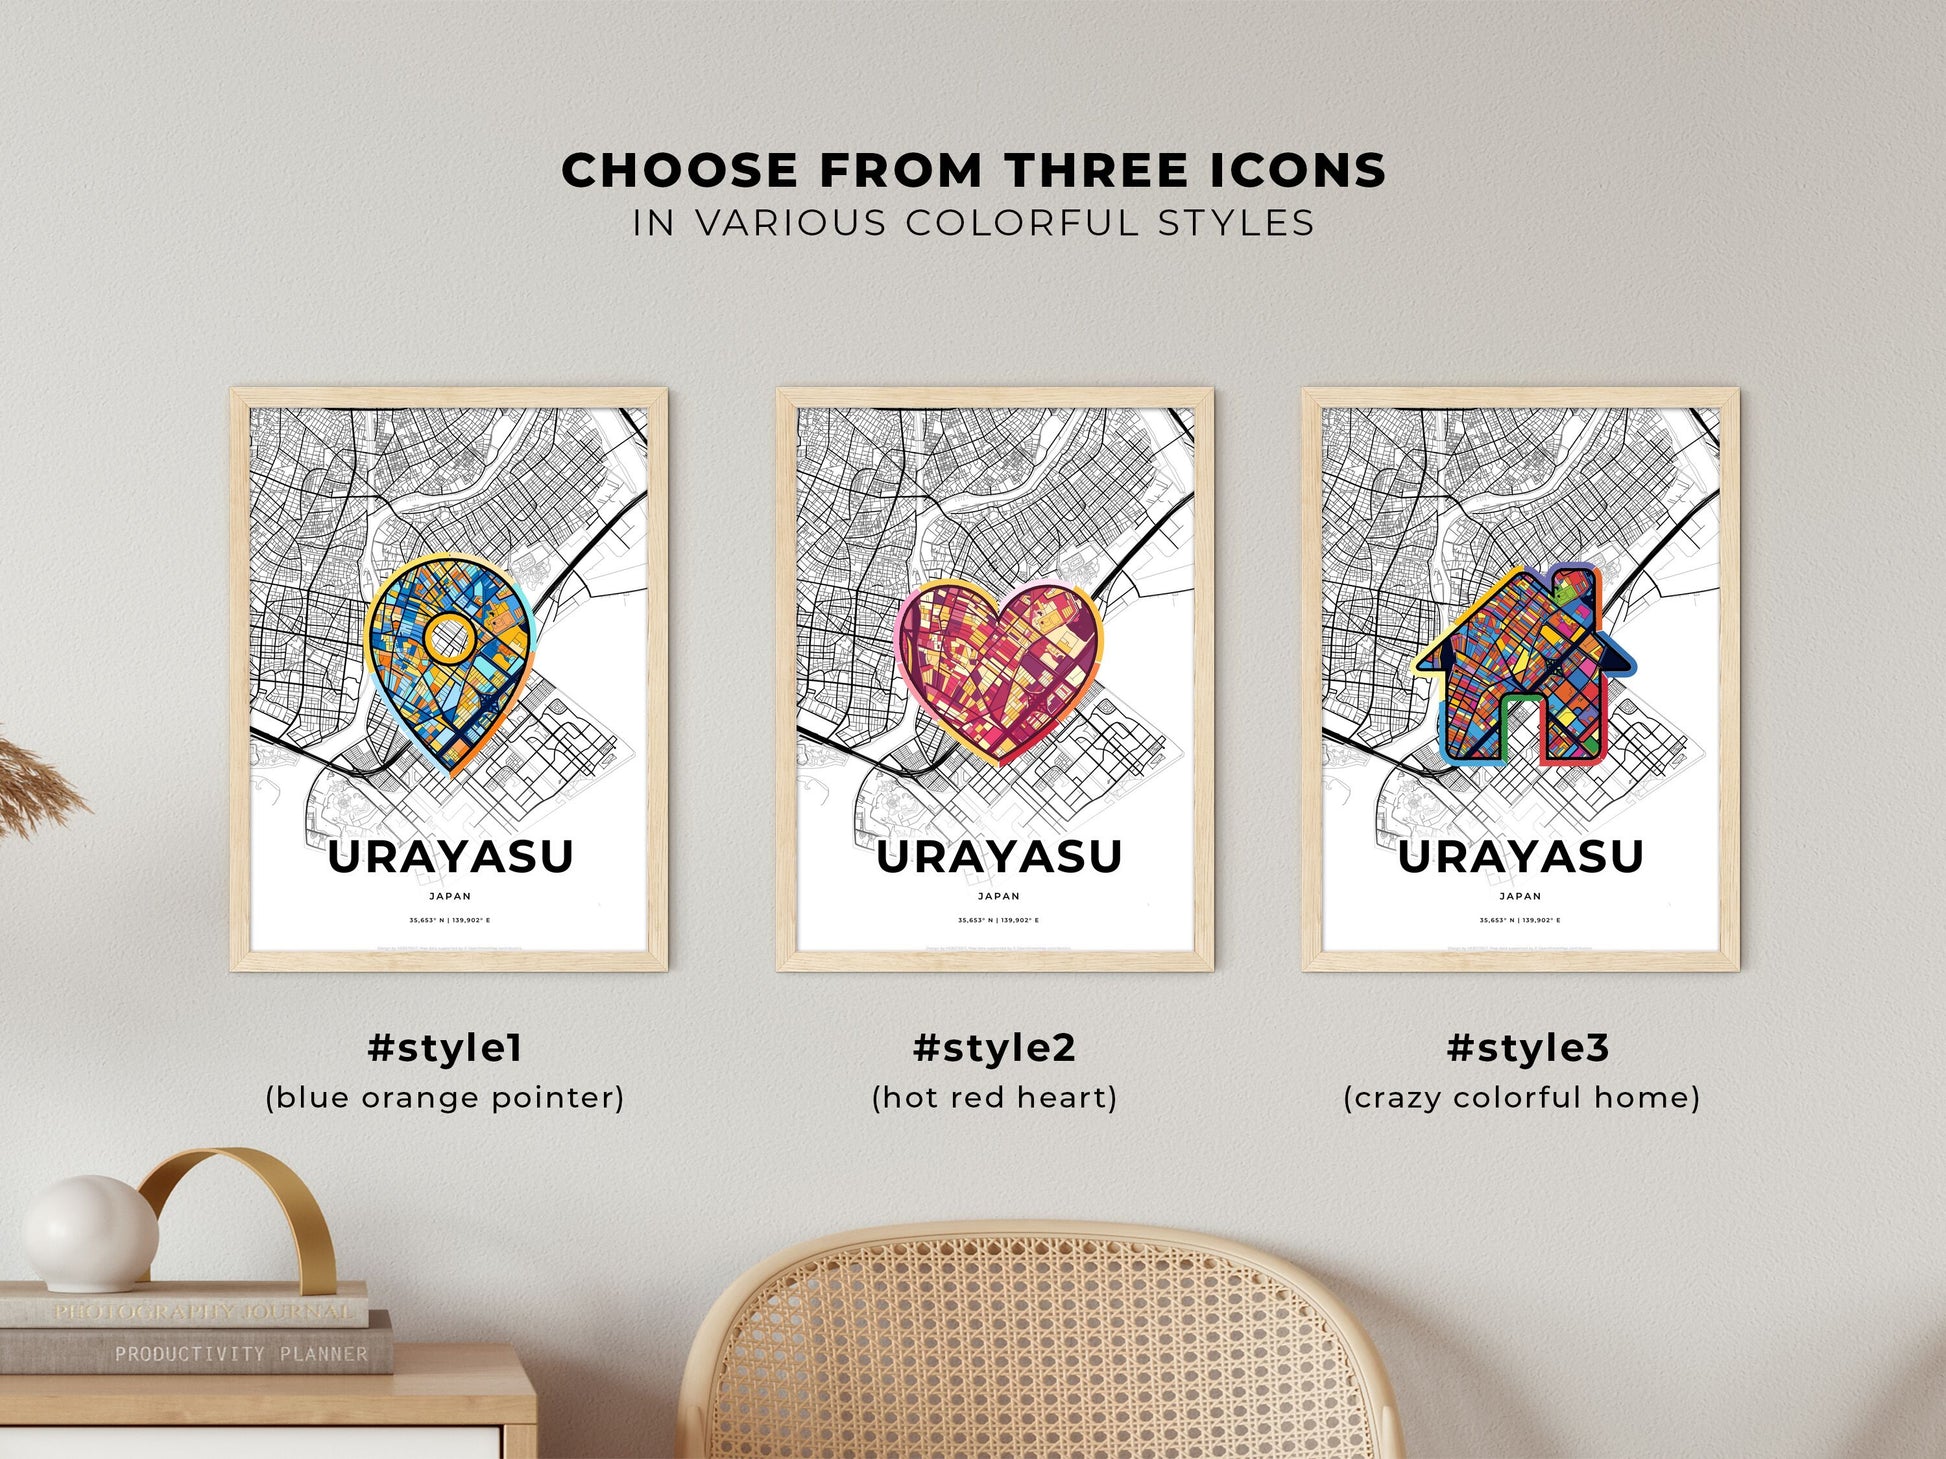 URAYASU JAPAN minimal art map with a colorful icon. Where it all began, Couple map gift.